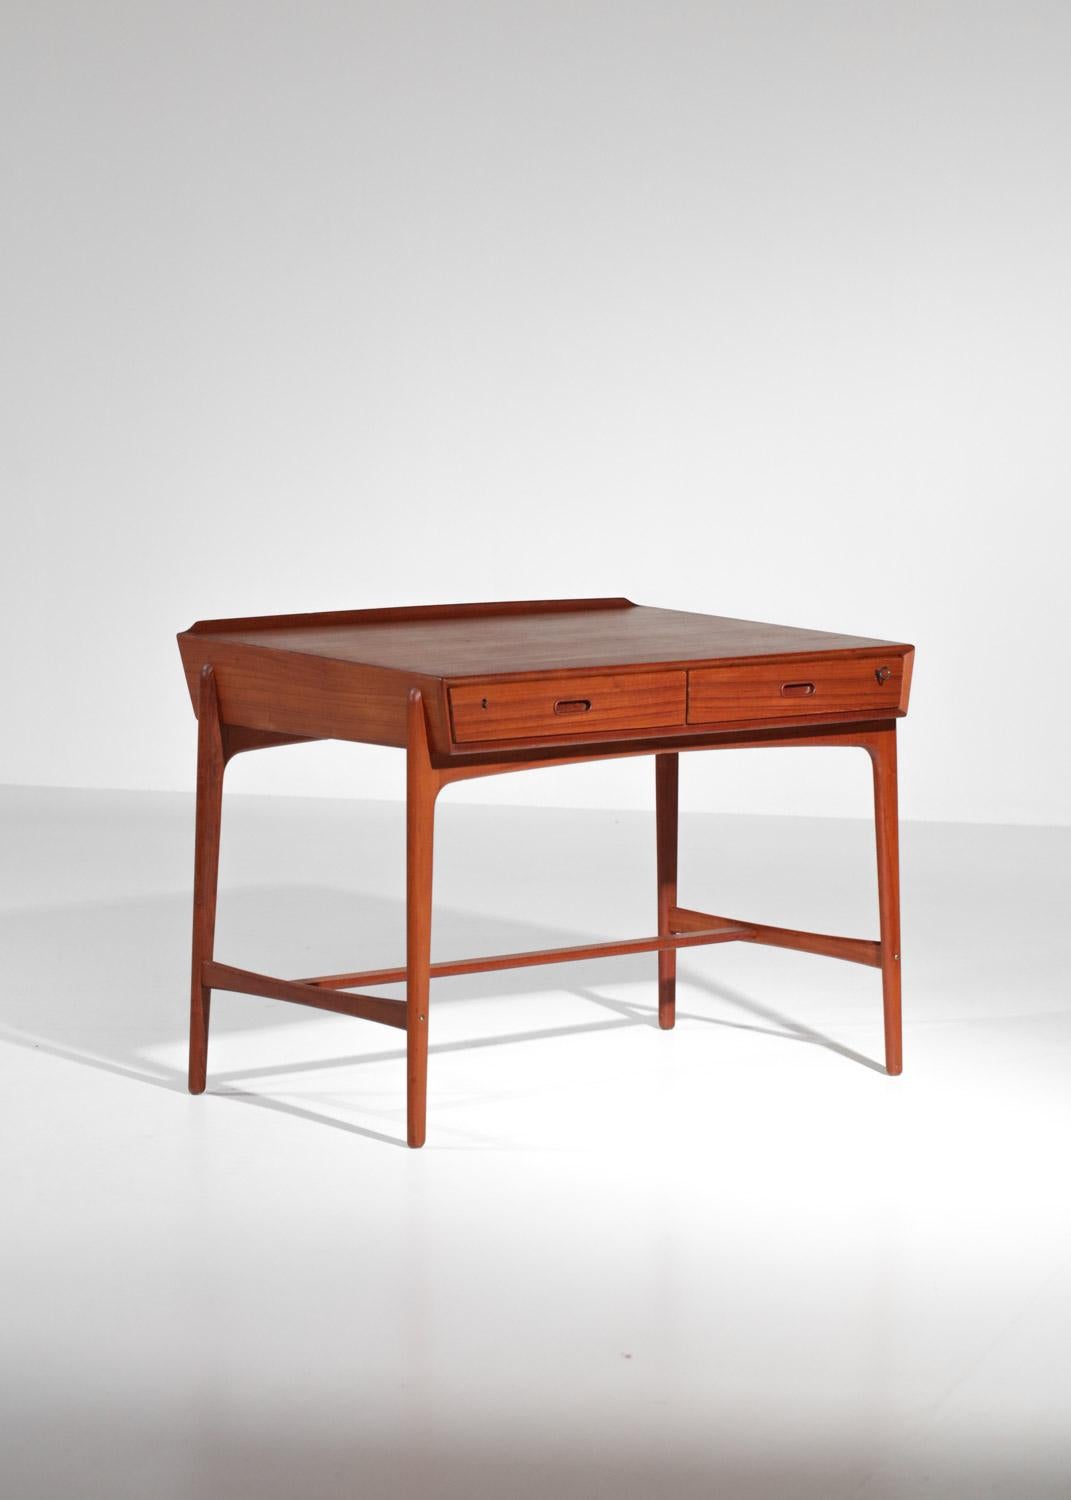 Small Scandinavian desk from the 1960s by the Danish designer Svend Aage Madsen. Structure in solid teak and veneer, this desk is composed of independent drawers locking with key (supplied). Desk with very nice sober and elegant lines typical of the